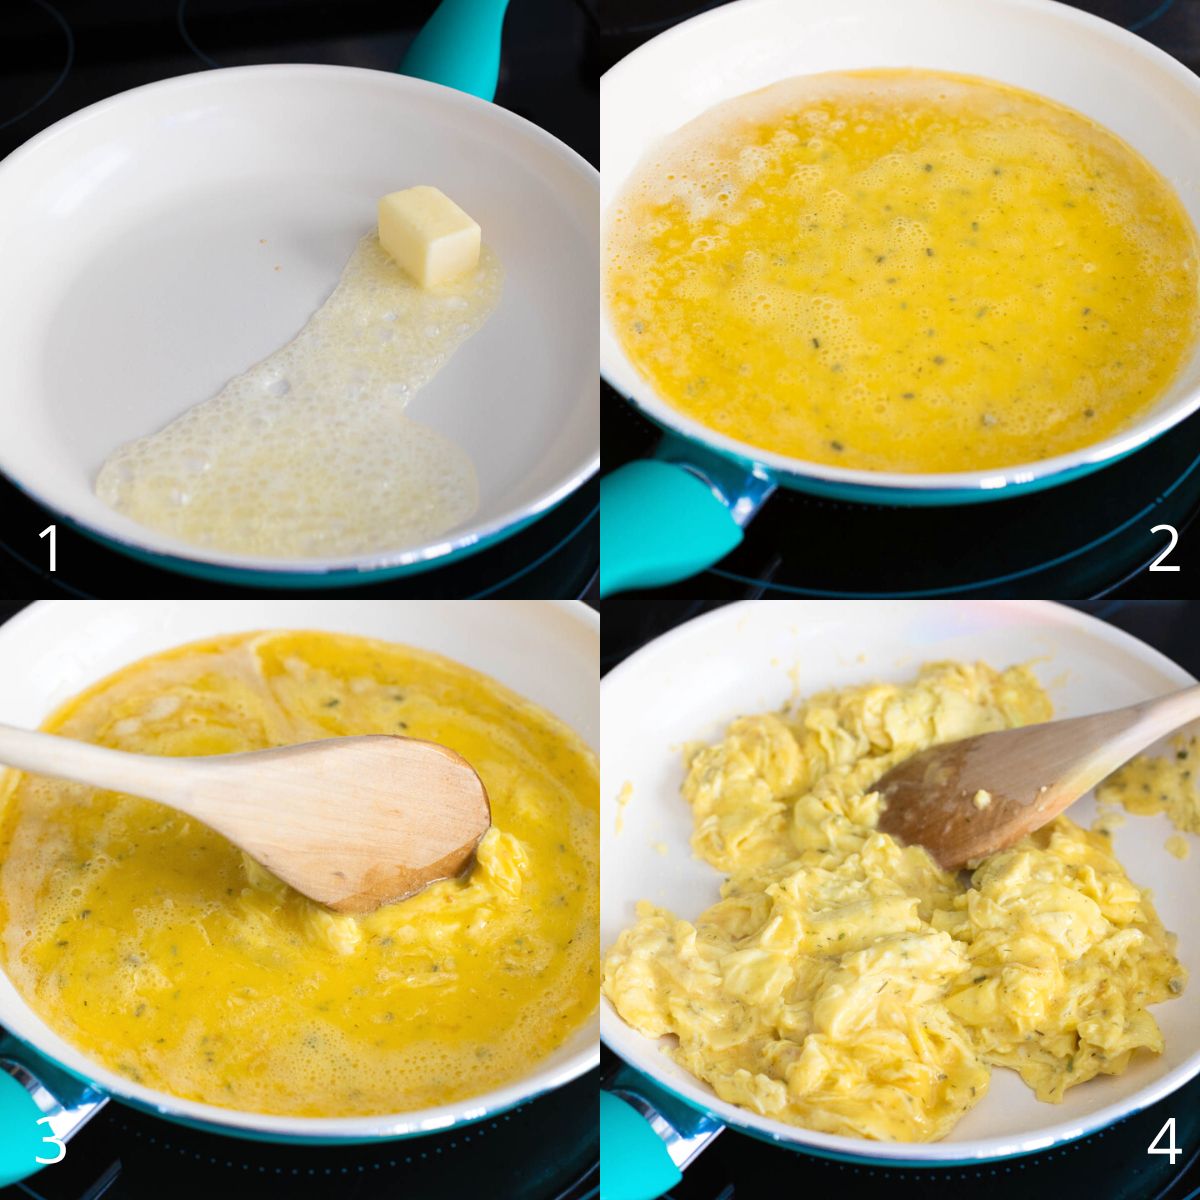 The step by step photos show how to scramble the eggs in a skillet.